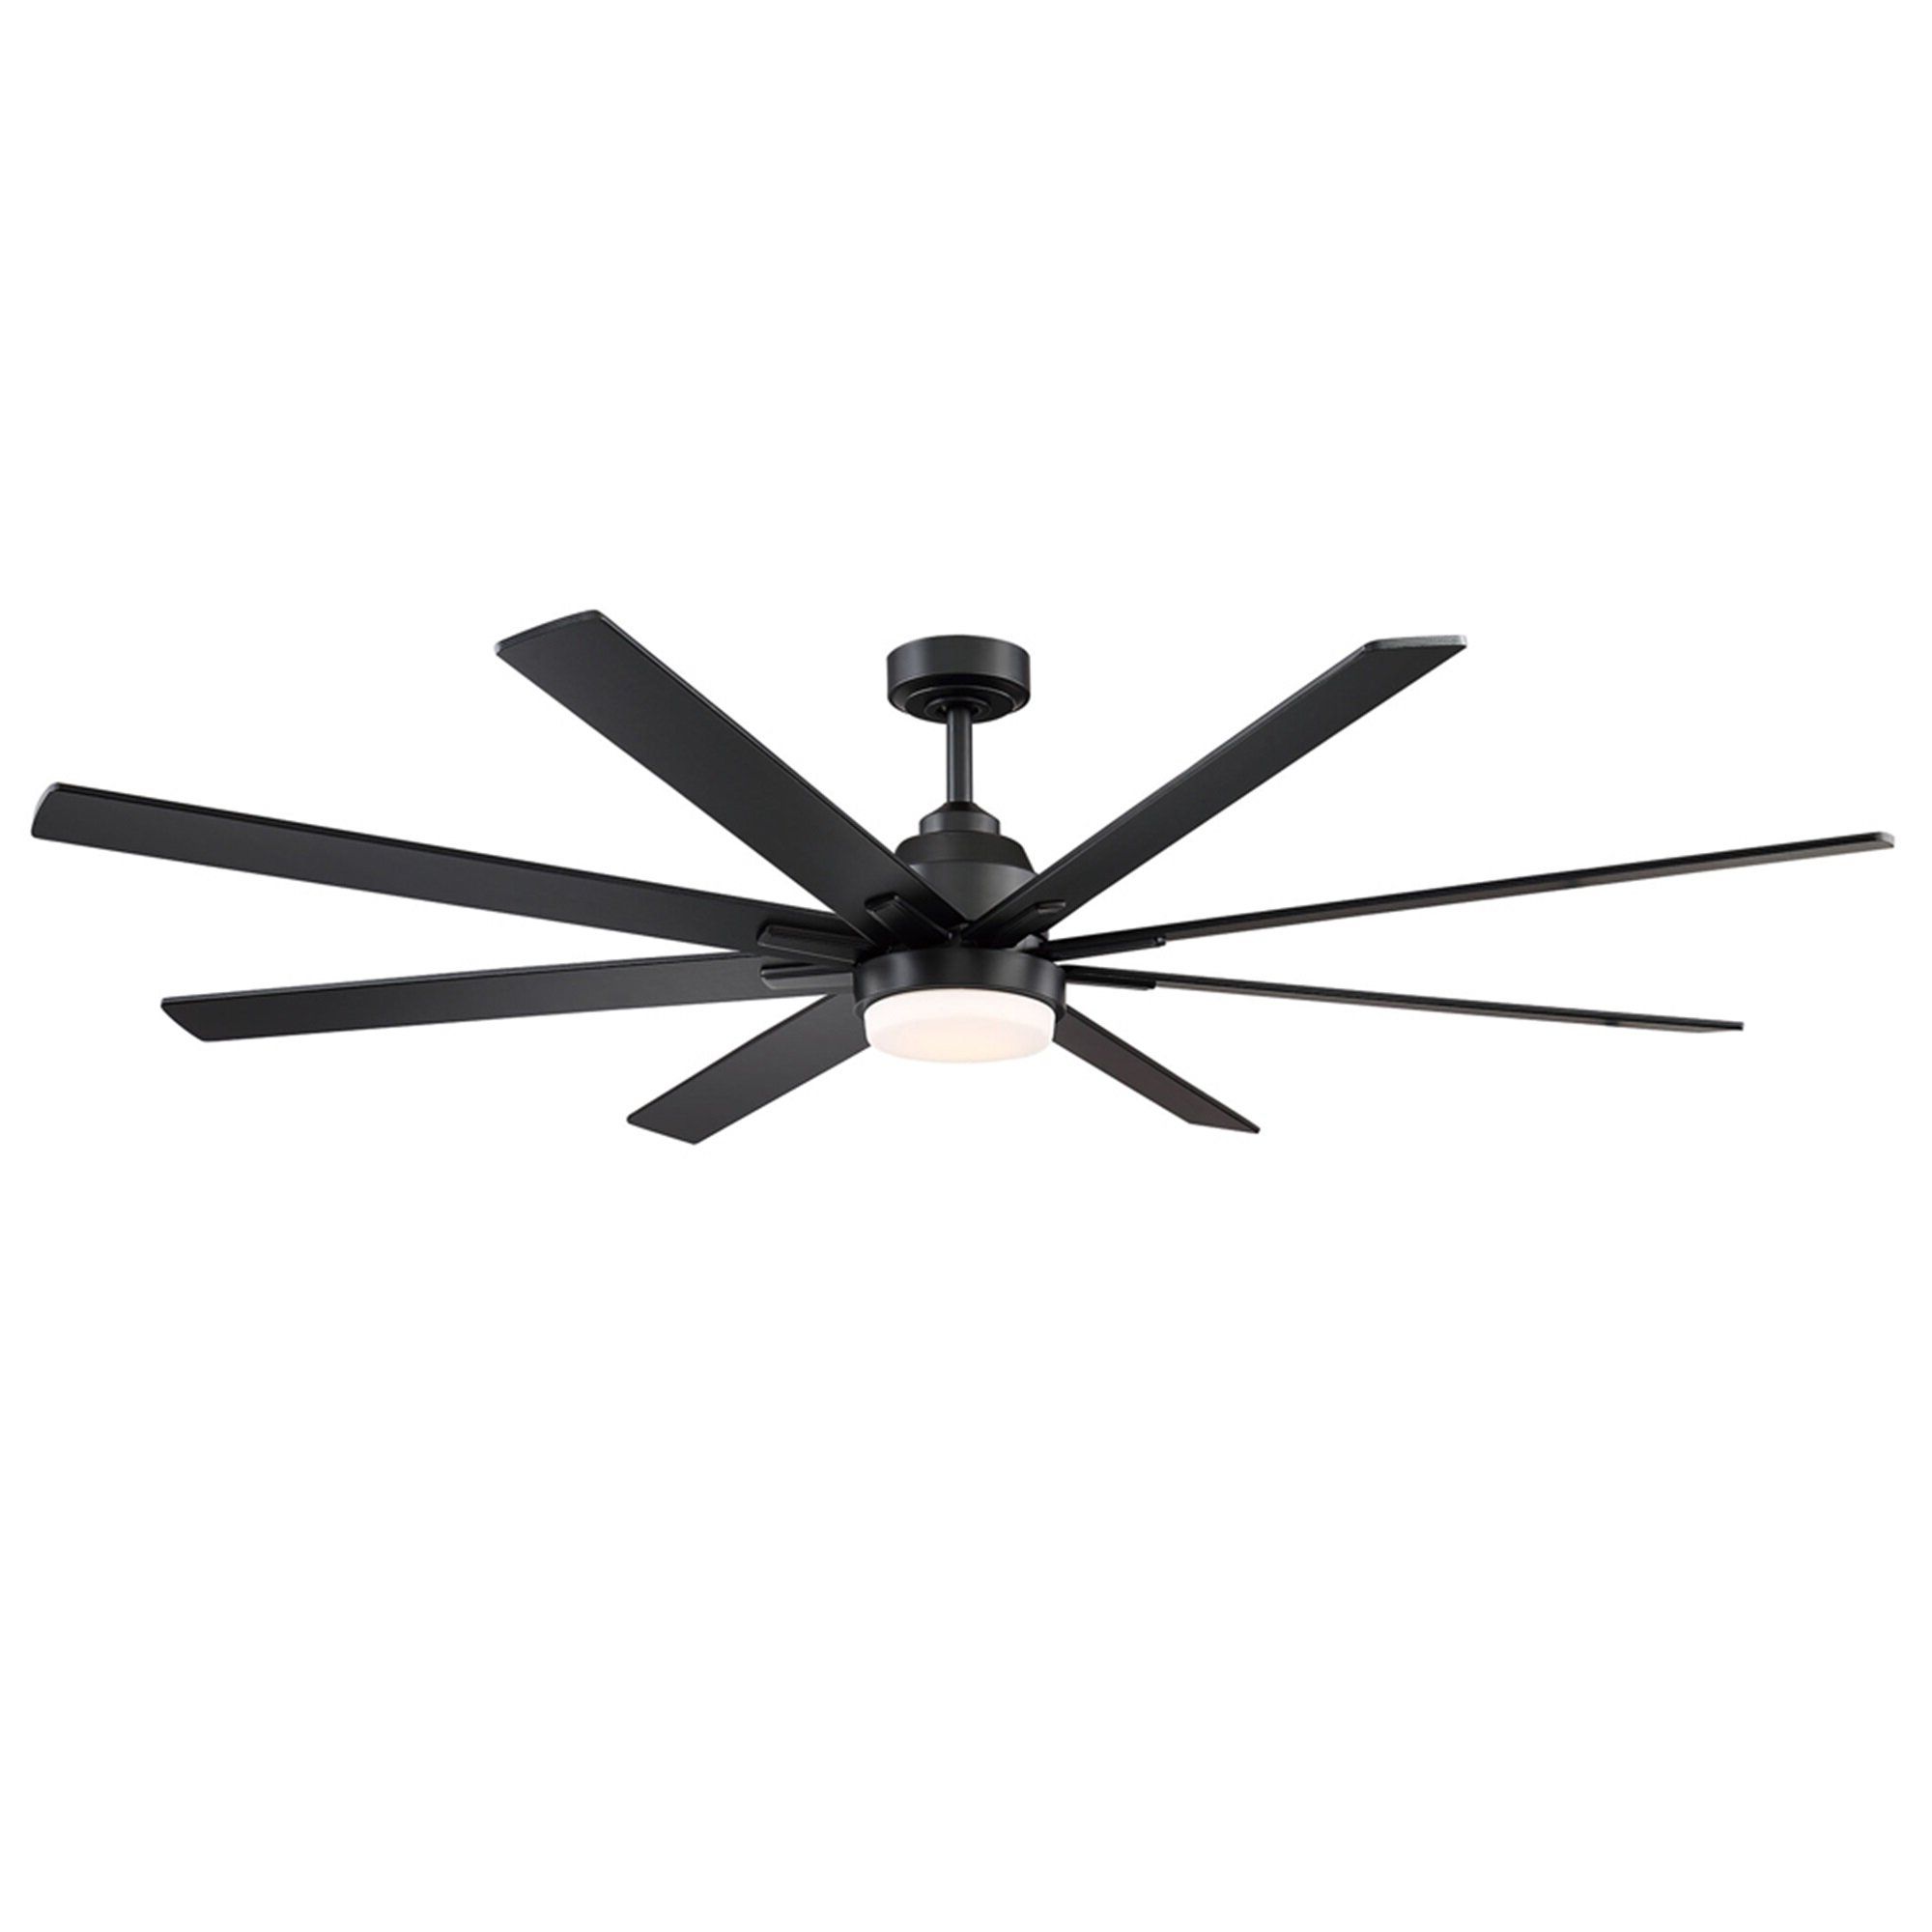 Gilda 8 Blade Led Ceiling Fan With Remote, Light Kit Included Throughout Widely Used Bankston 8 Blade Led Ceiling Fans (View 4 of 20)